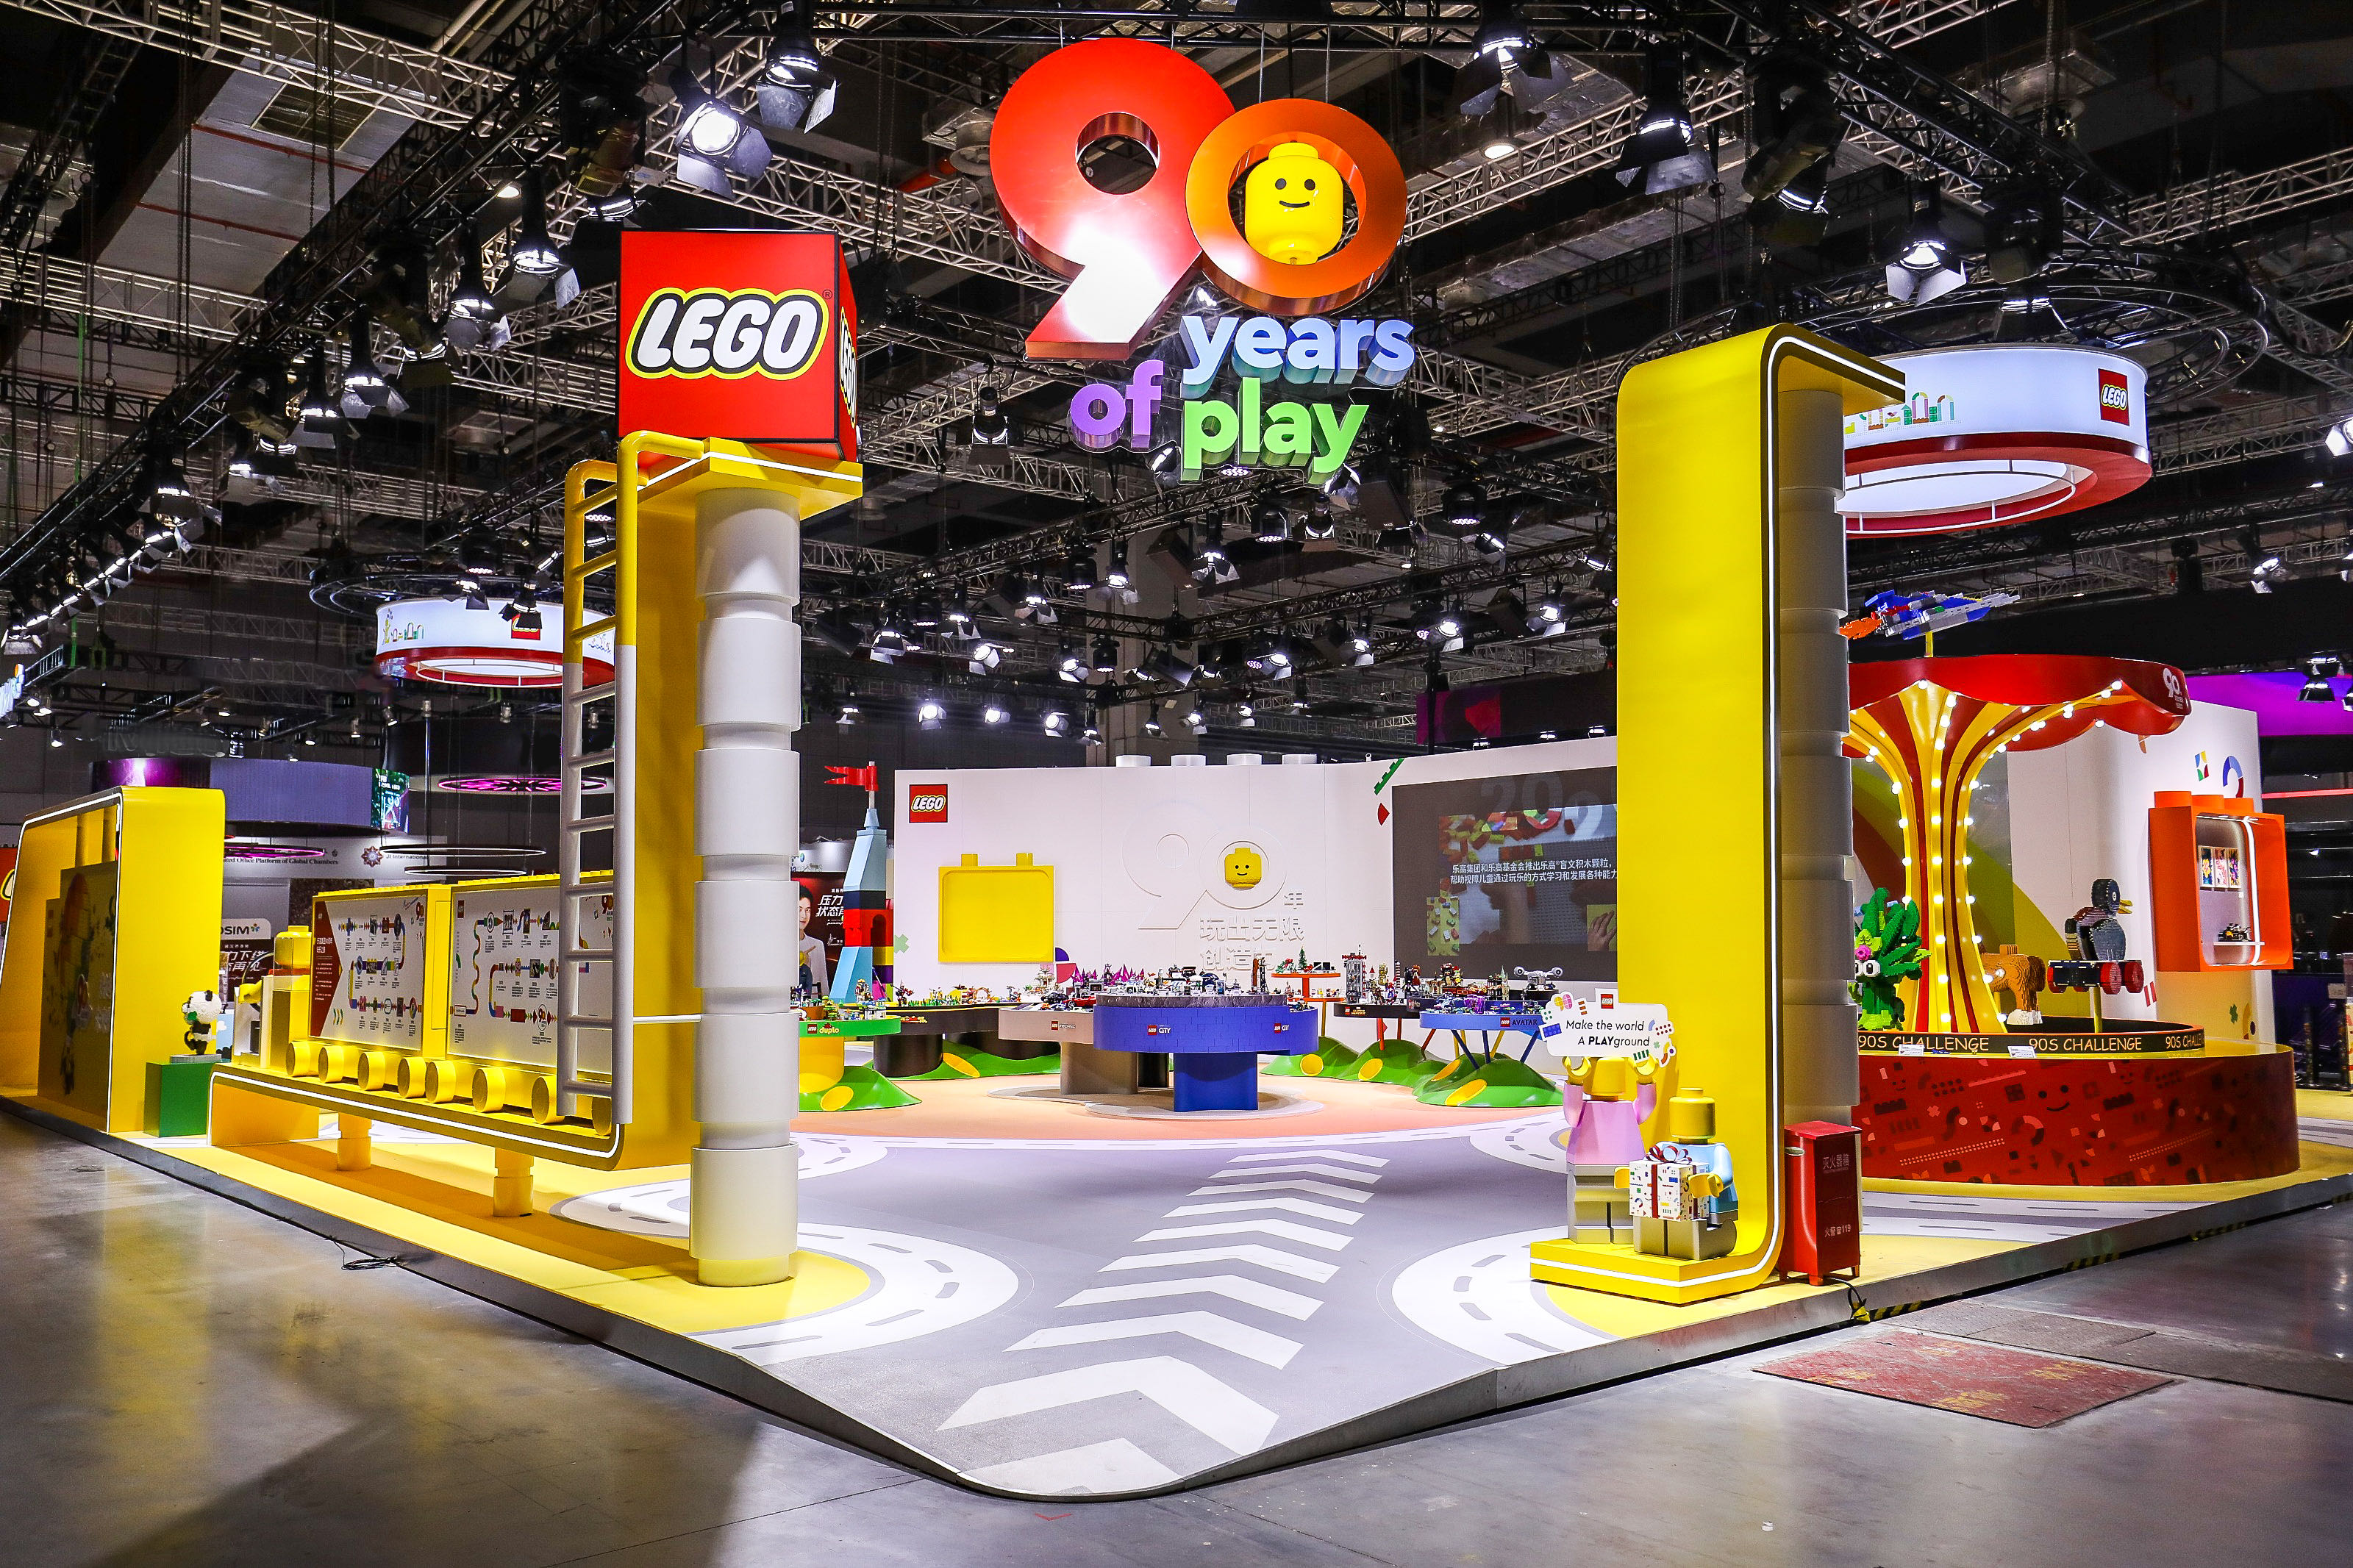 The LEGO Group reveals its largest line-up of novelties inspired